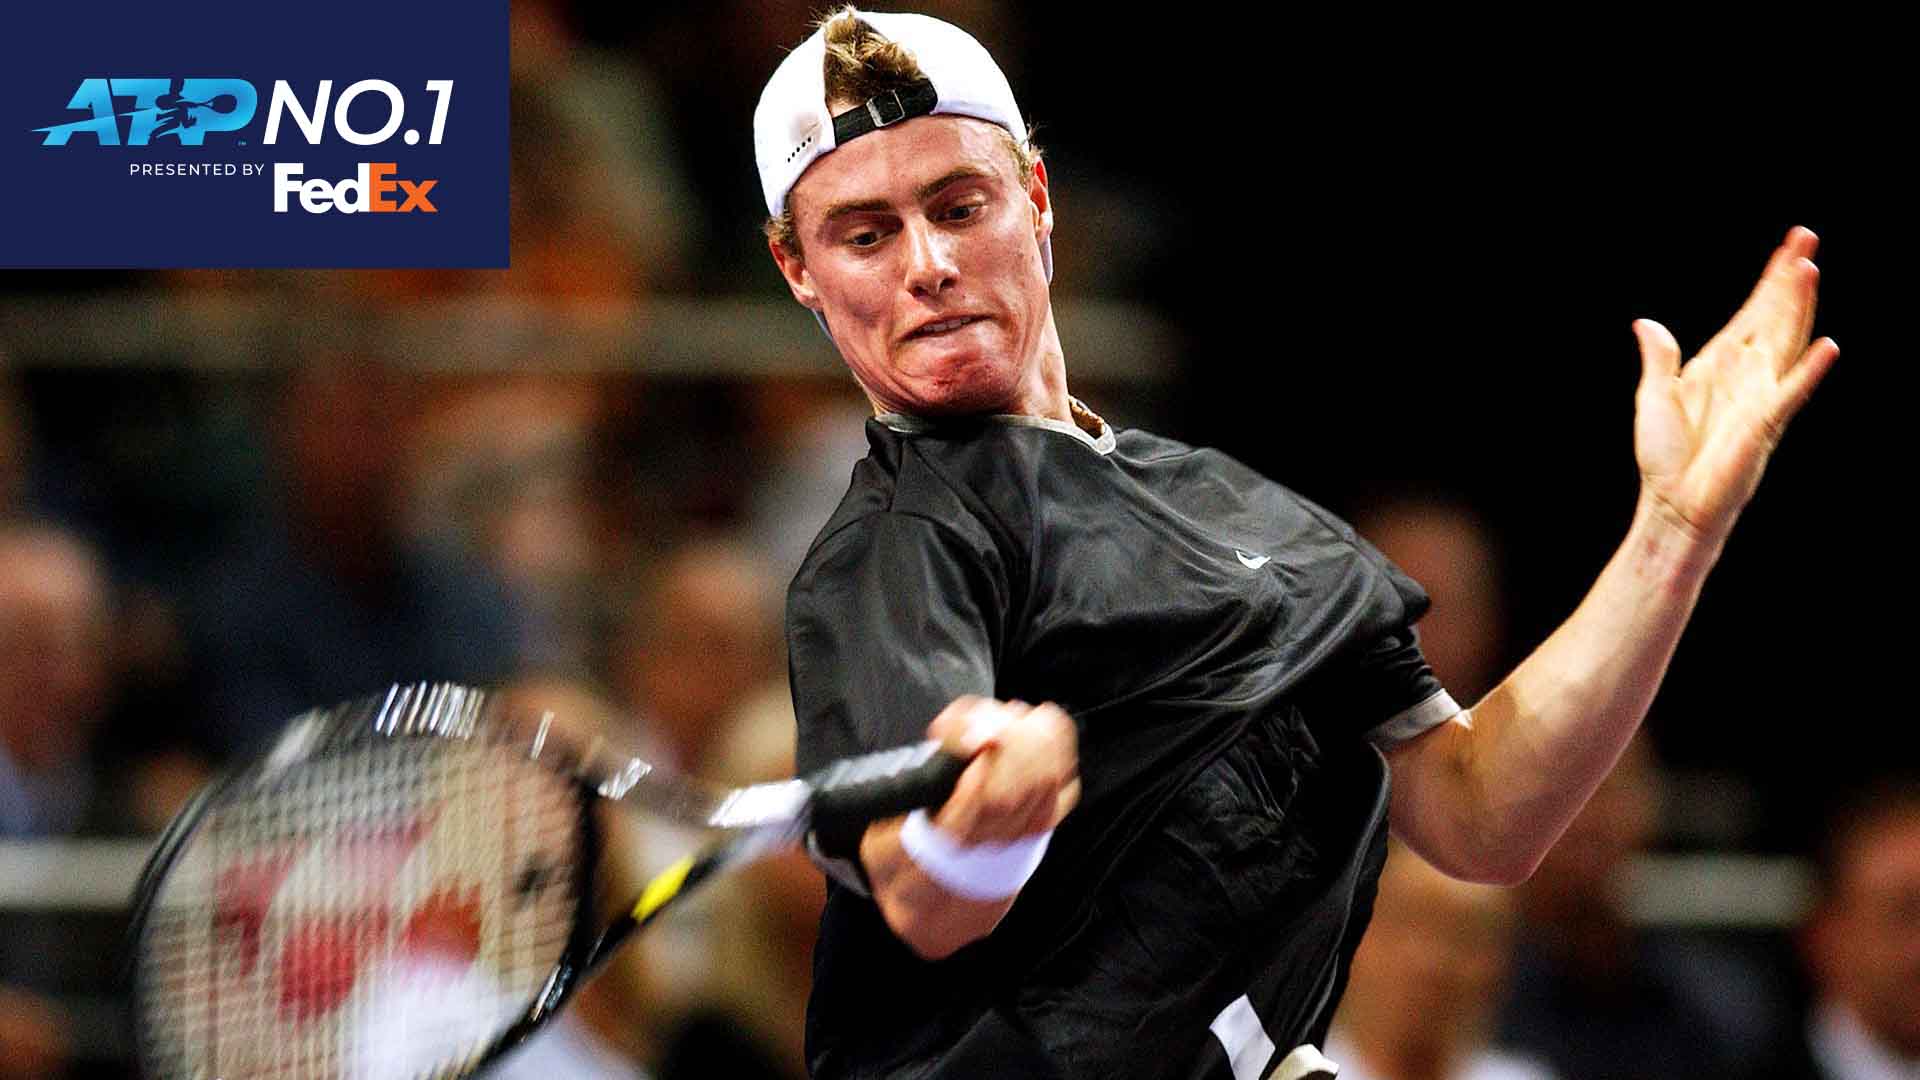 Lleyton Hewitt finished as year-end World No. 1 in the FedEx ATP Rankings in 2001 and 2002.